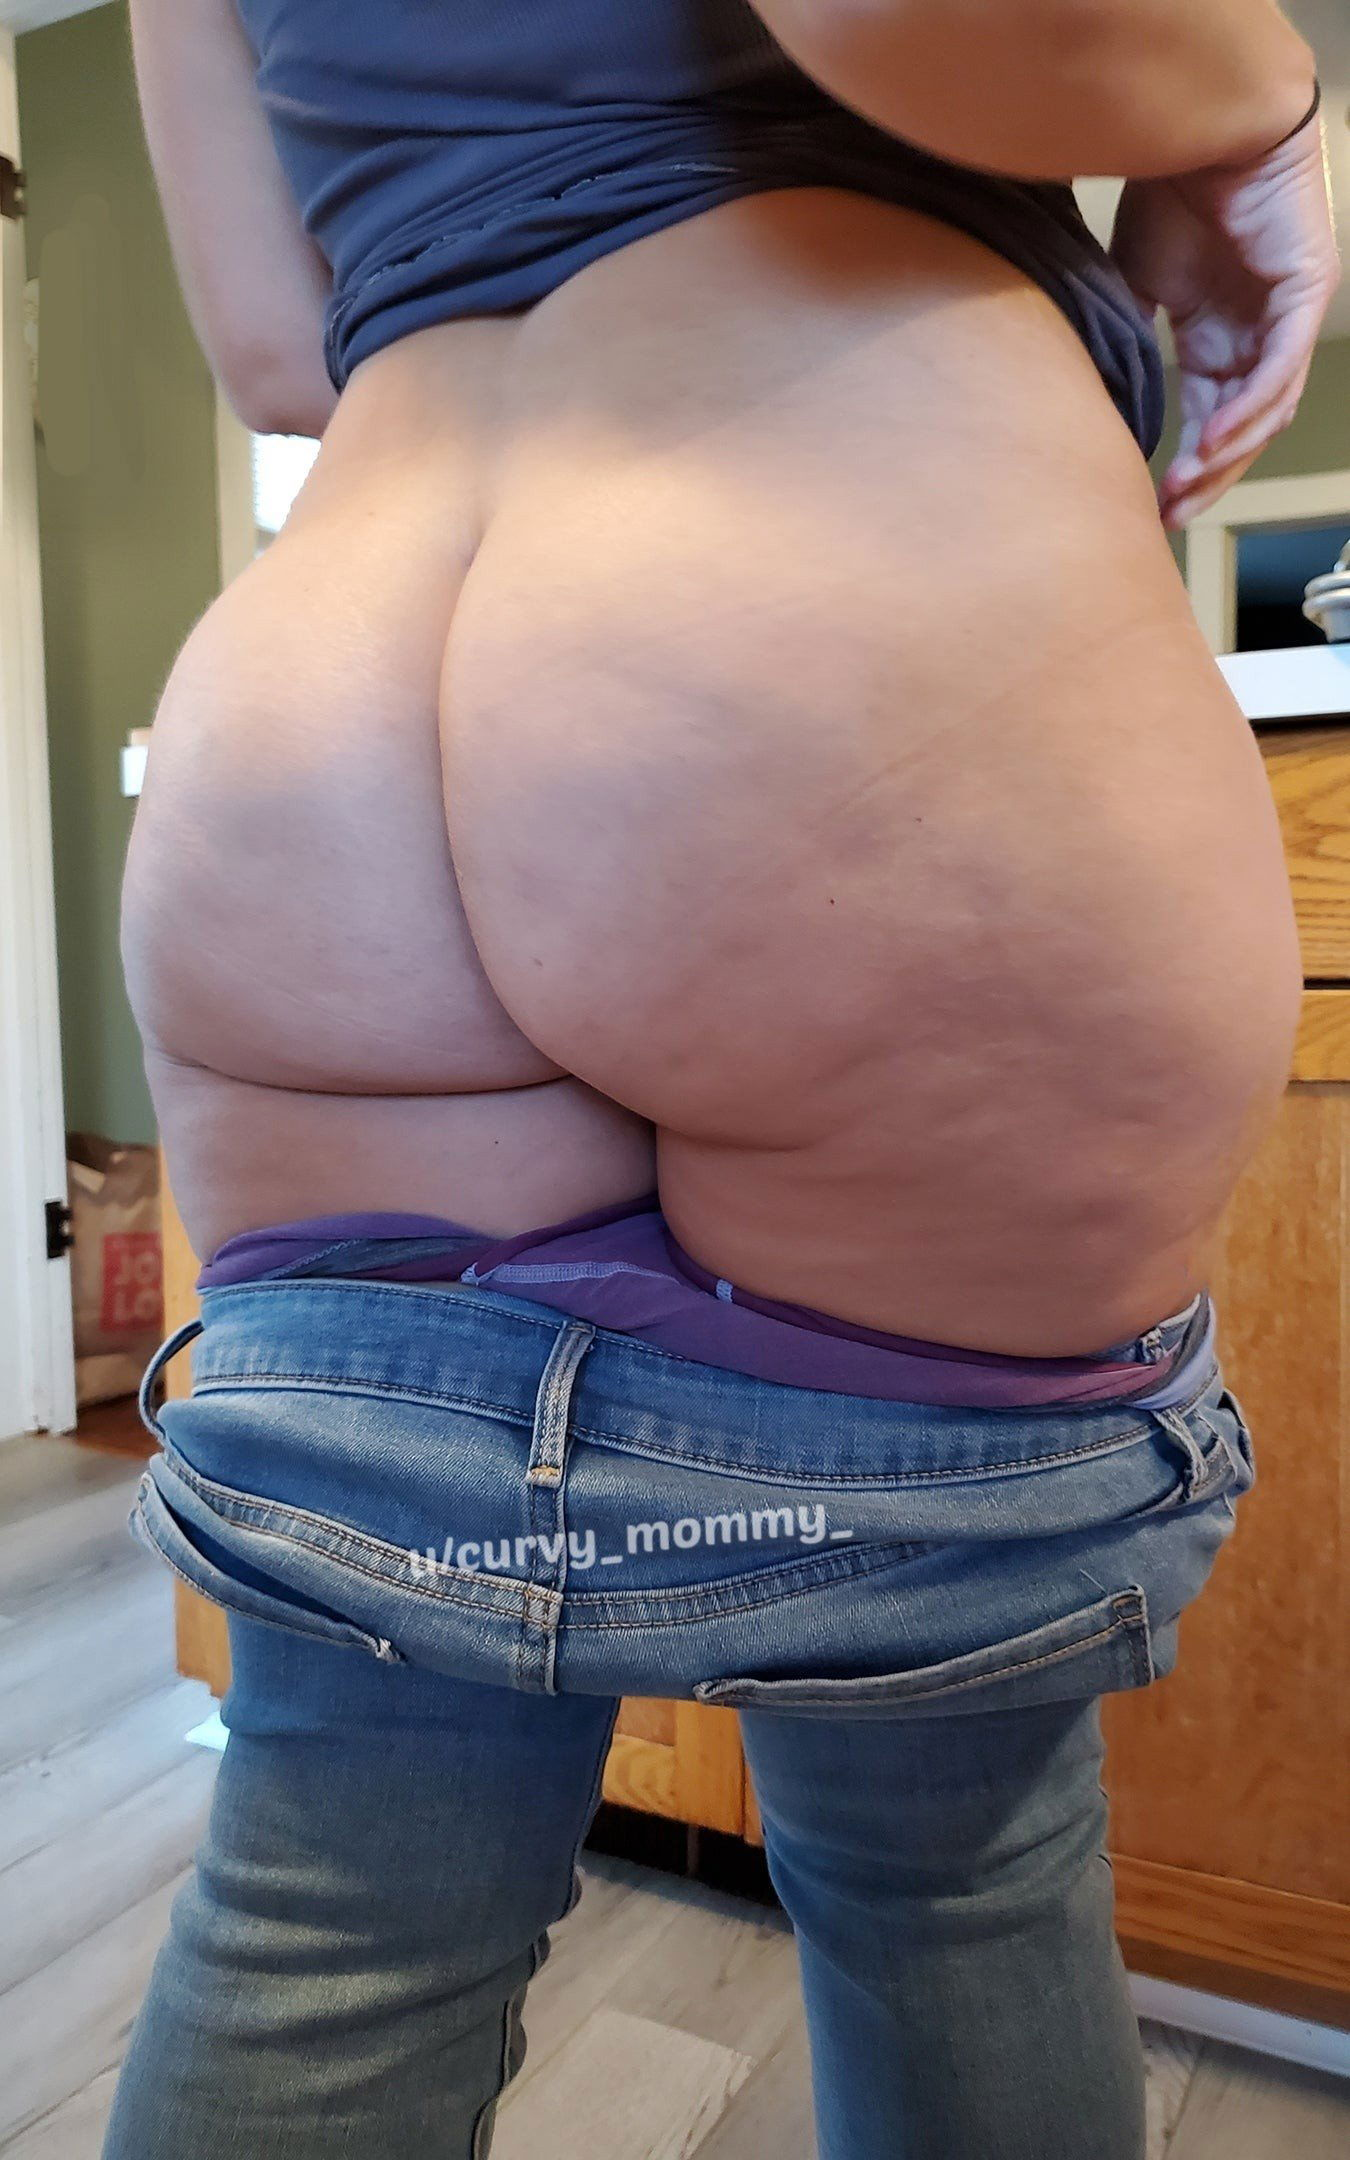 Photo by Sadhorse69 with the username @Sadhorse69,  May 29, 2022 at 1:10 AM. The post is about the topic My go to and the text says 'curvy_mommy_'